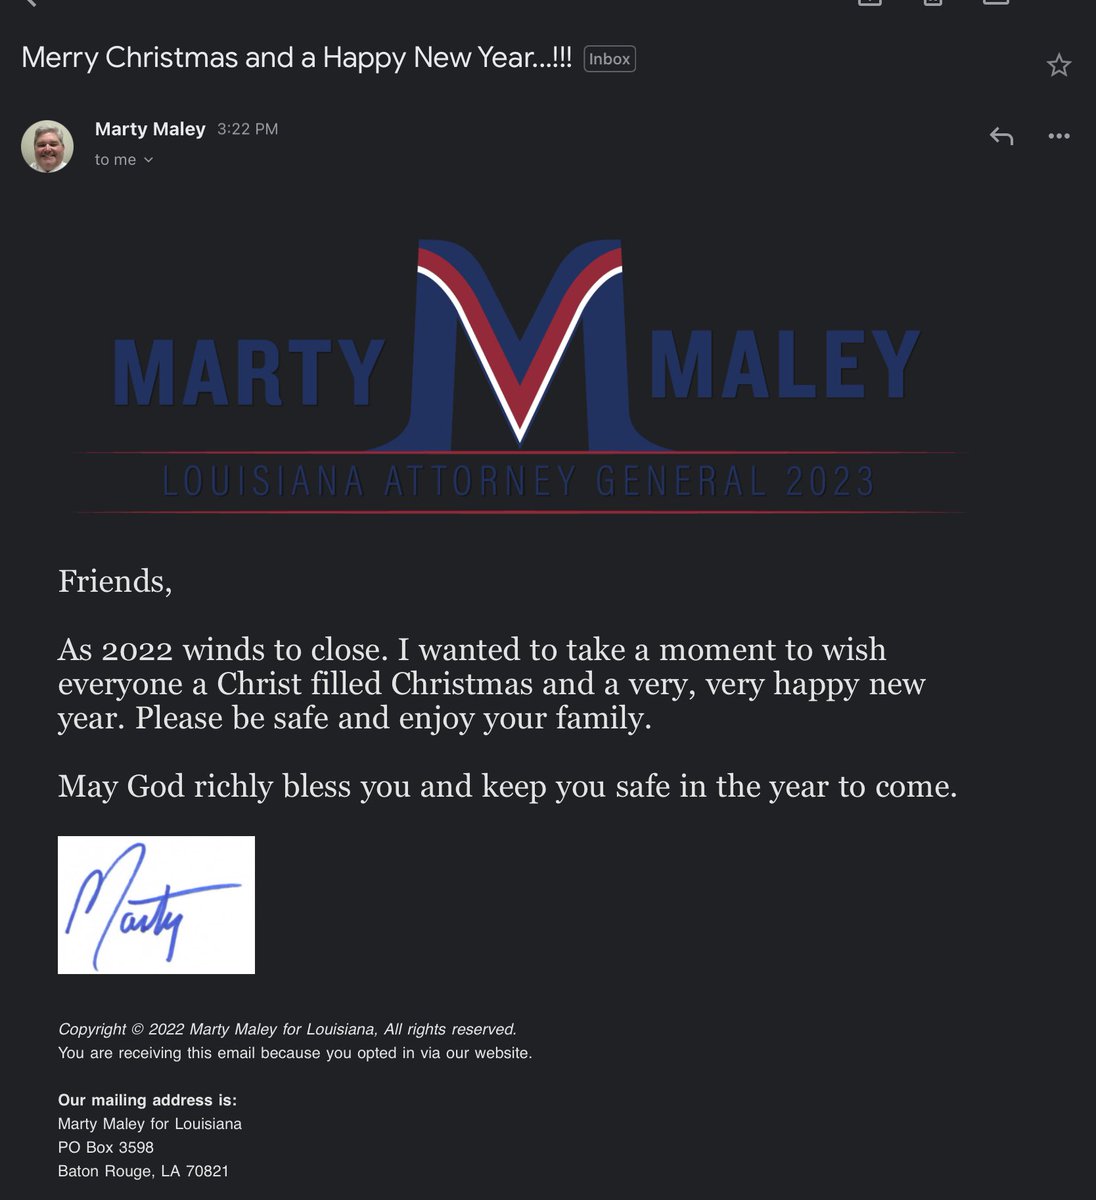 Not only did this candidate for Louisiana attorney General 2023 #Martymaley interrupt my peace w/ his politicking email, BUT he invoked Jesus Christ in relation to Christmas in the letter. (1/?)
#louisianapolitics #happyholidays #martymaley2023 #lalege